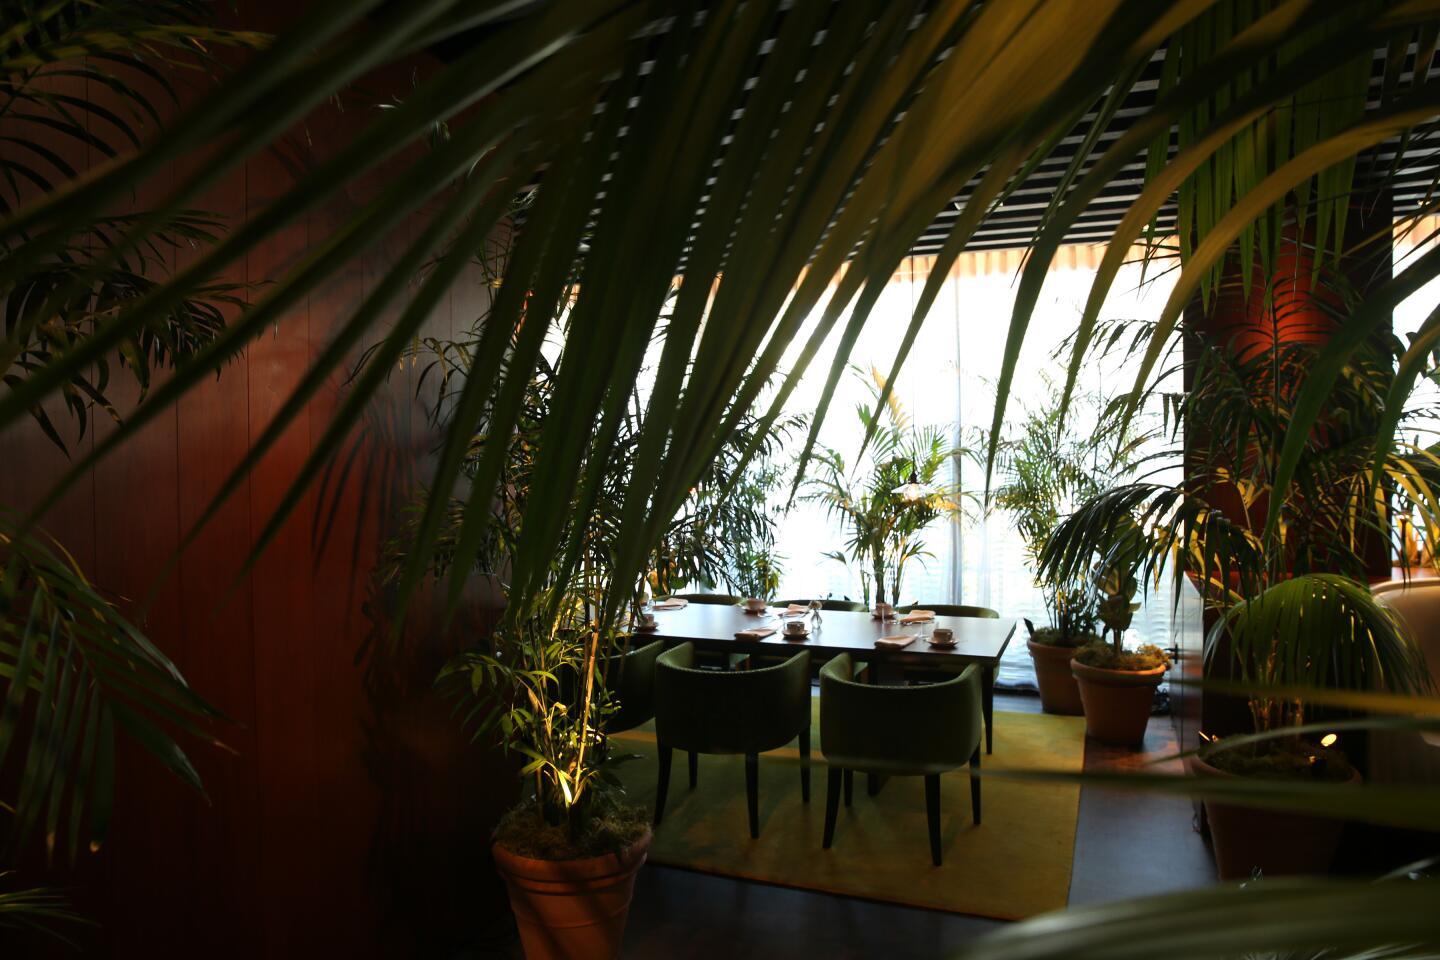 The plant-filled restaurant at the new Edition hotel in West Hollywood, Calif.